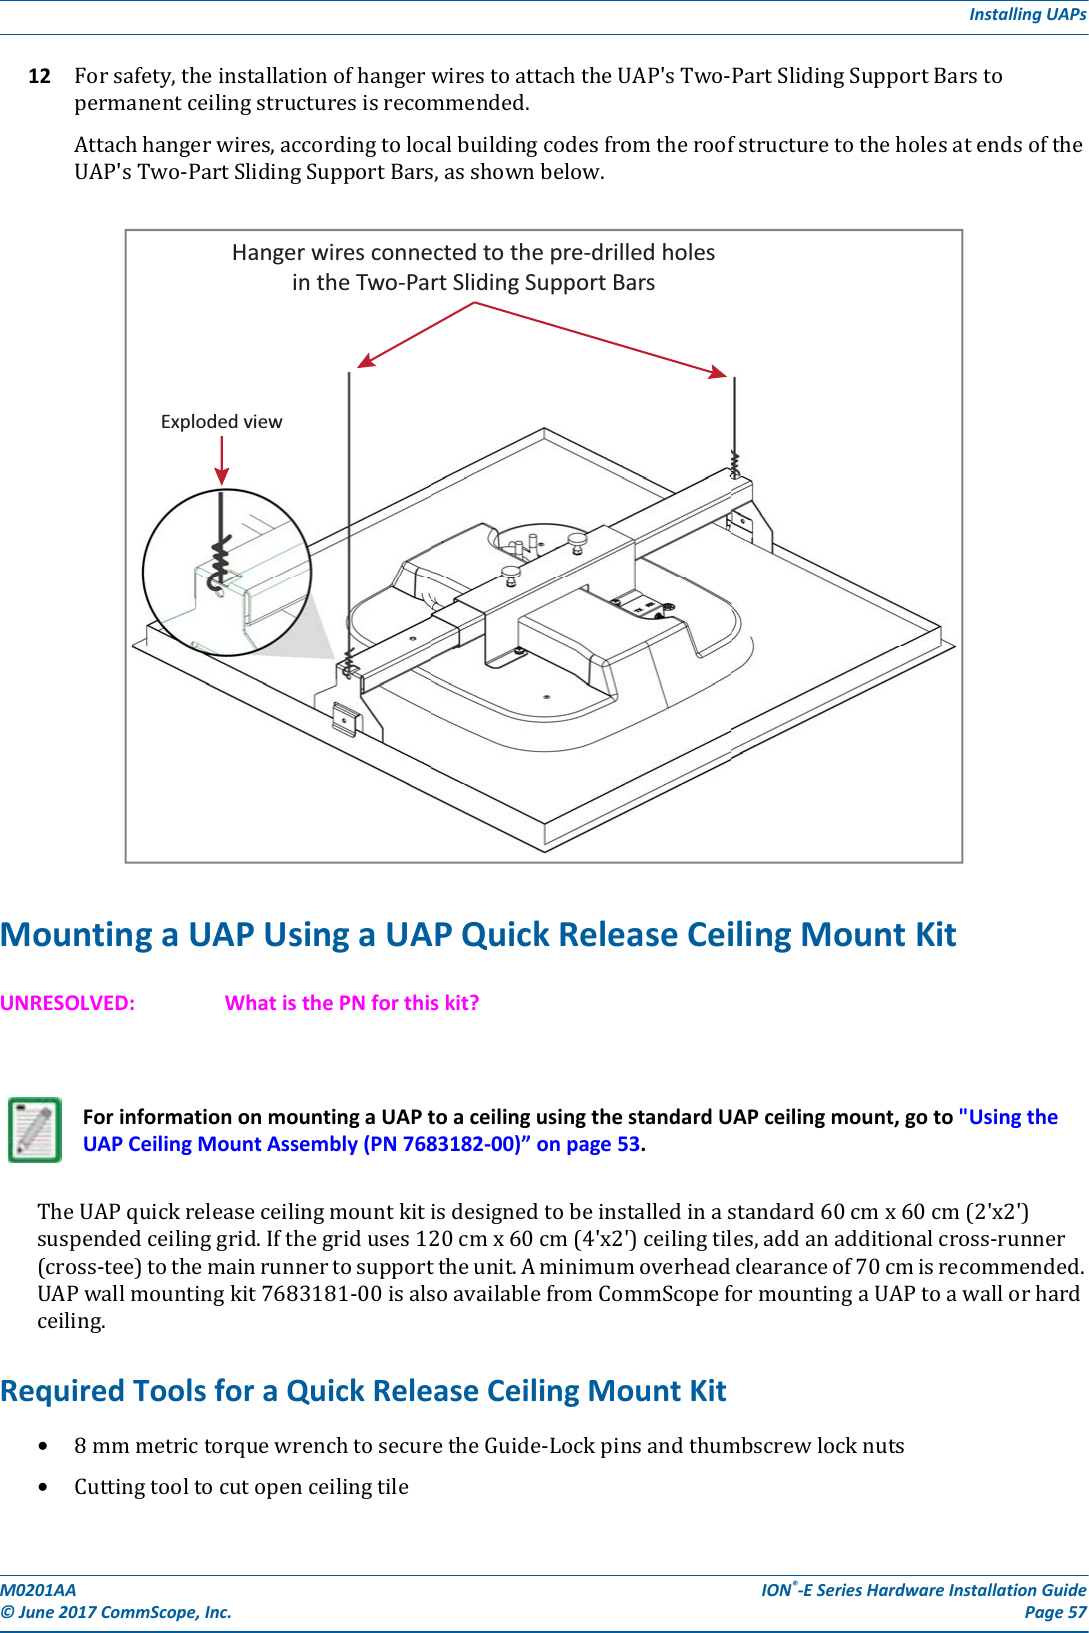 M0201AA ION®-E Series Hardware Installation Guide© June 2017 CommScope, Inc. Page 57Installing UAPs12 Forsafety,theinstallationofhangerwirestoattachtheUAP&apos;sTwo-PartSlidingSupportBarstopermanentceilingstructuresisrecommended.Attachhangerwires,accordingtolocalbuildingcodesfromtheroofstructuretotheholesatendsoftheUAP&apos;sTwo-PartSlidingSupportBars,asshownbelow.Mounting a UAP Using a UAP Quick Release Ceiling Mount KitUNRESOLVED: What is the PN for this kit?TheUAPquickreleaseceilingmountkitisdesignedtobeinstalledinastandard60cmx60cm(2&apos;x2&apos;)suspendedceilinggrid.Ifthegriduses120cmx60cm(4&apos;x2&apos;)ceilingtiles,addanadditionalcross-runner(cross-tee)tothemainrunnertosupporttheunit.Aminimumoverheadclearanceof70cmisrecommended.UAPwallmountingkit7683181-00isalsoavailablefromCommScopeformountingaUAPtoawallorhardceiling.Required Tools for a Quick Release Ceiling Mount Kit•8mmmetrictorquewrenchtosecuretheGuide-Lockpinsandthumbscrewlocknuts•CuttingtooltocutopenceilingtileFor information on mounting a UAP to a ceiling using the standard UAP ceiling mount, go to &quot;Using the UAP Ceiling Mount Assembly (PN 7683182-00)” on page 53.Hanger wires connected to the pre-drilled holesin the Two-Part Sliding Support BarsExploded view